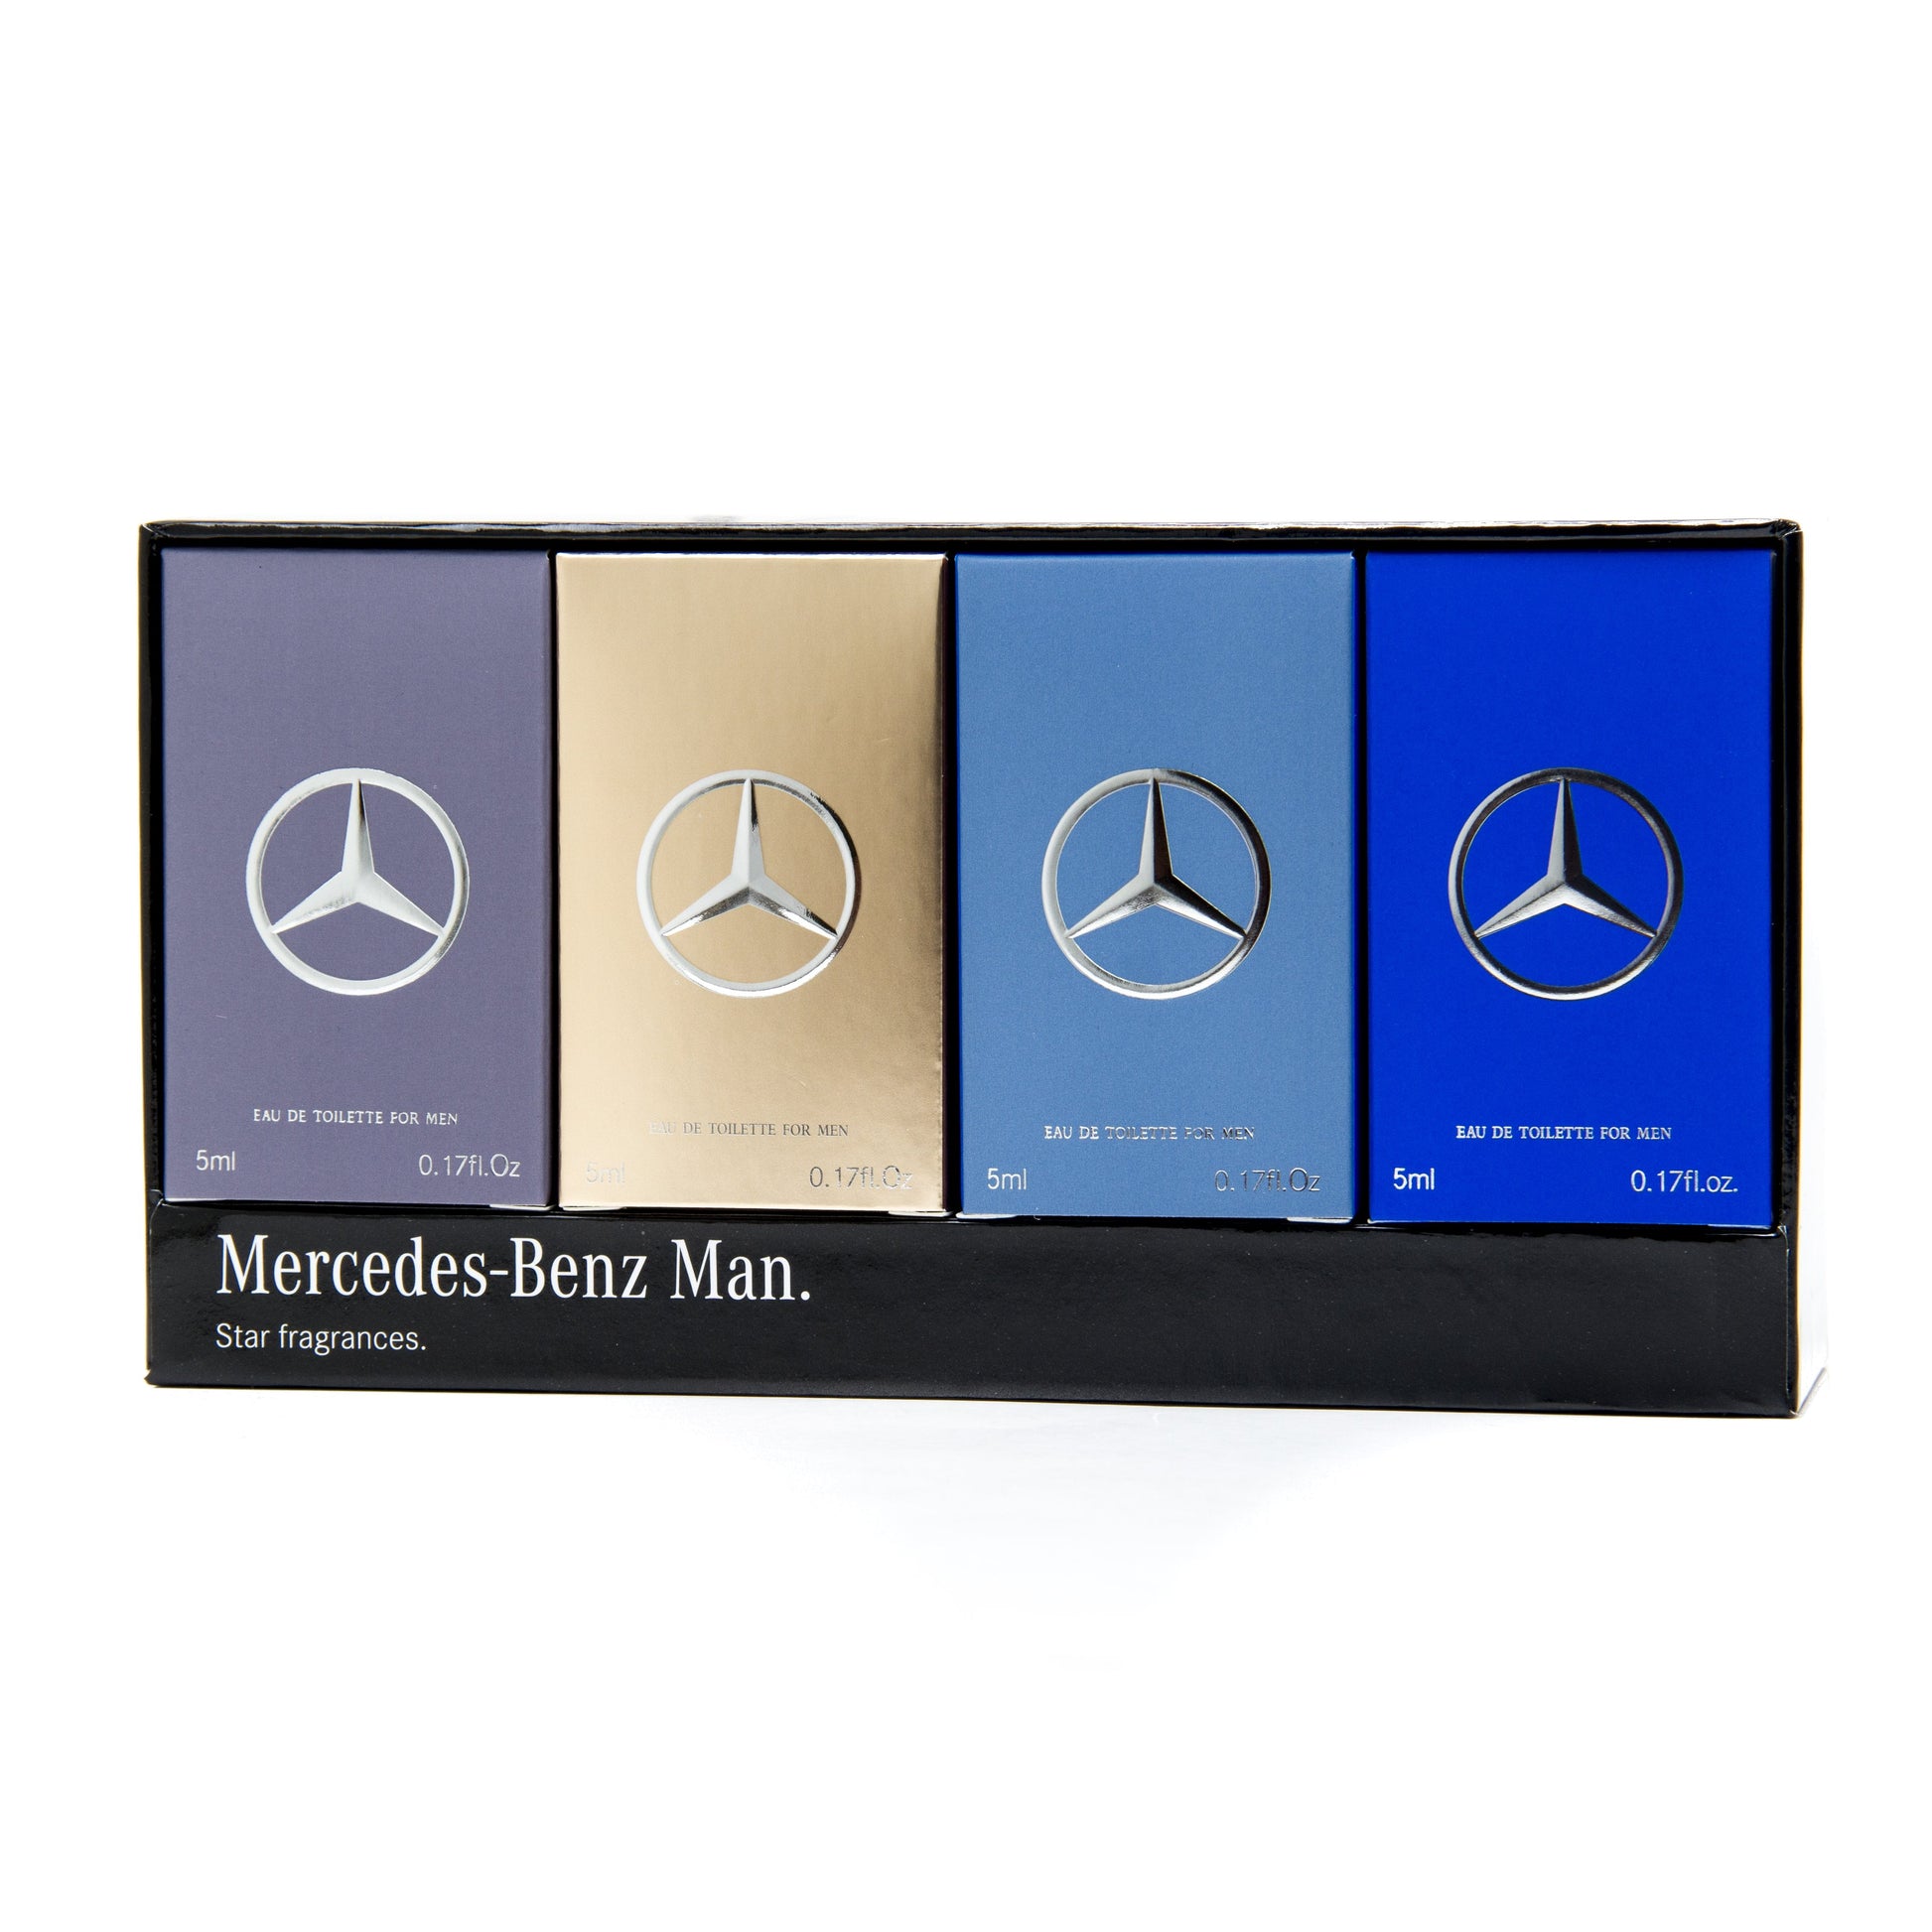 Mercedes-Benz Man Miniature Gift Set for Men by Mercedes-Benz, Product image 2